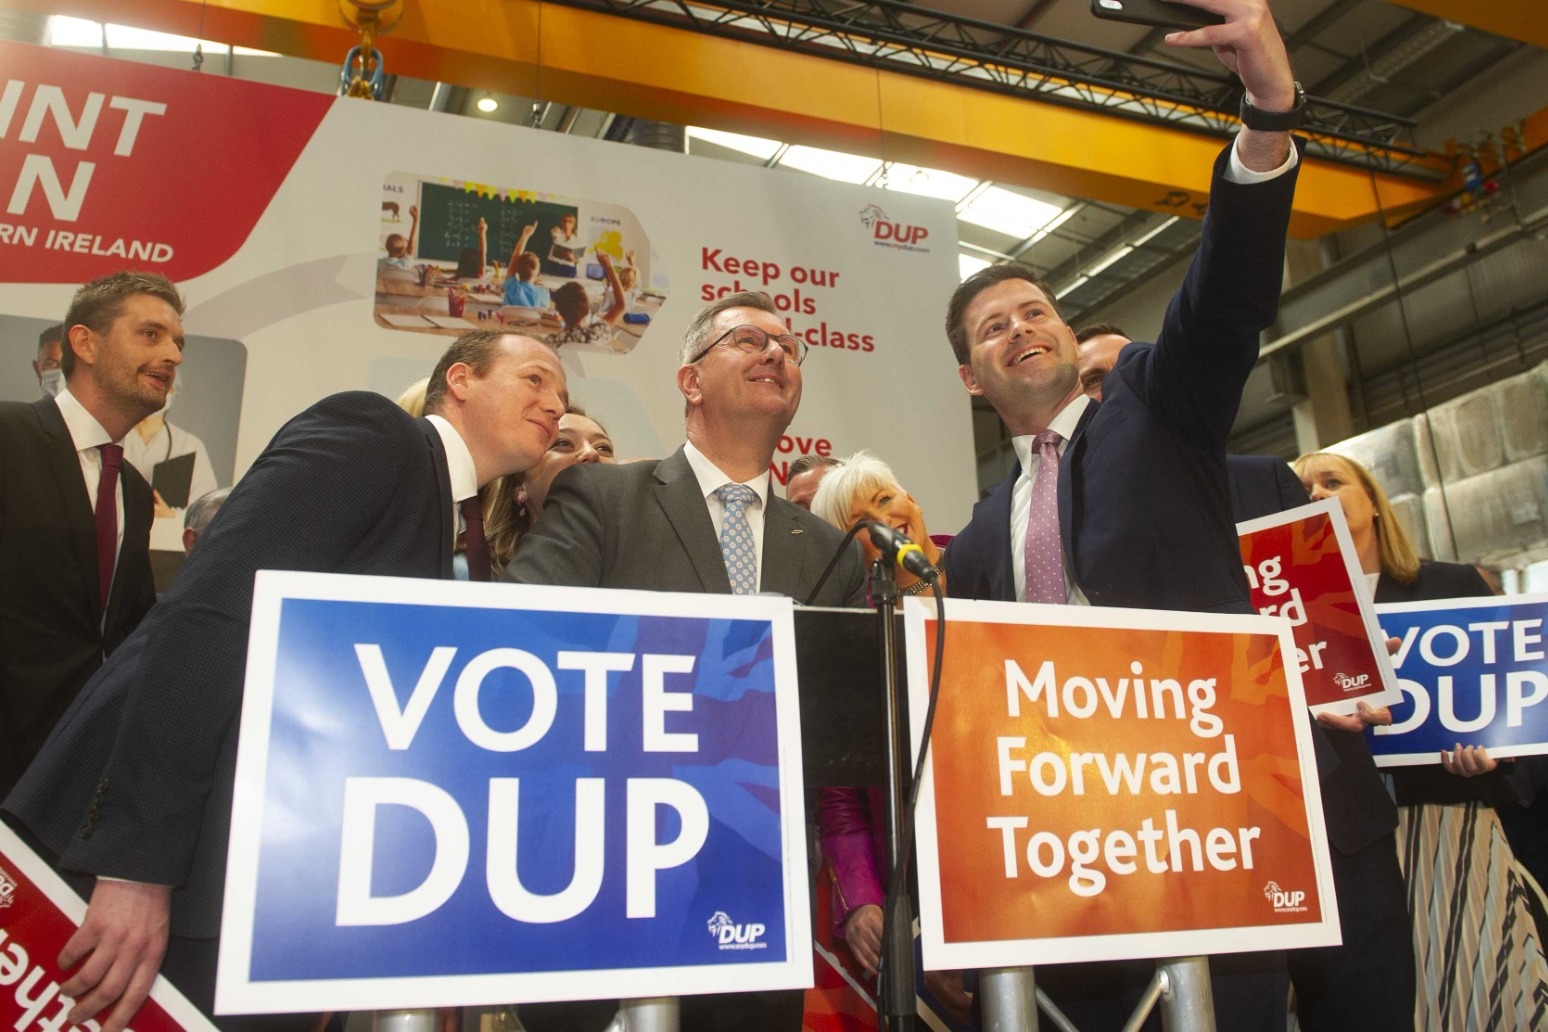 DUP not using scare tactics in election campaign over border poll: Donaldson 